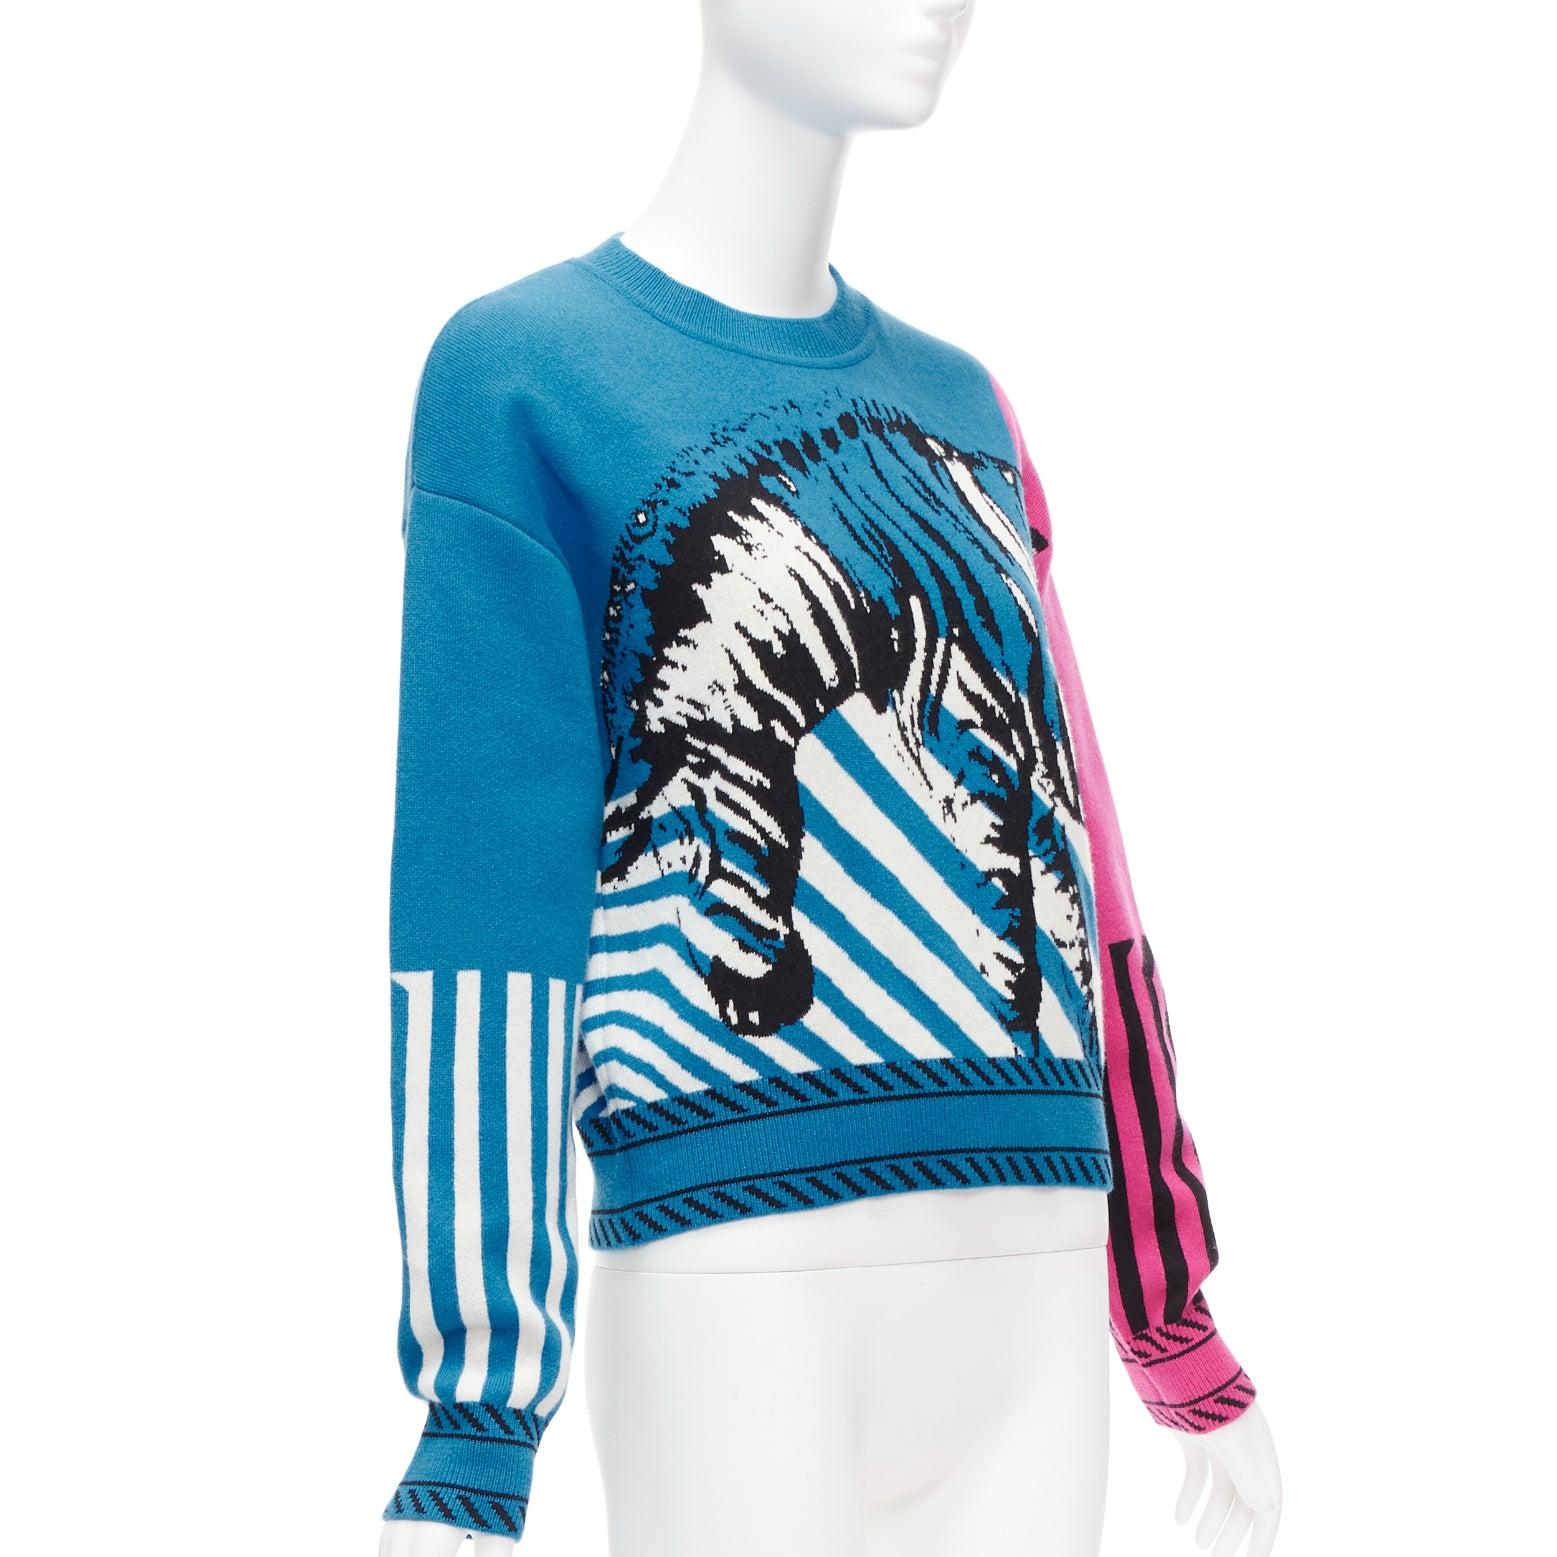 CHRISTIAN DIOR D-Jungle Pop Zebra graphic blue pink cashmere sweater FR34 S
Reference: AAWC/A00660
Brand: Christian Dior
Designer: Maria Grazia Chiuri
Collection: D-Jungle
Material: Cashmere, Blend
Color: Blue, Pink
Pattern: Graphic
Extra Details: